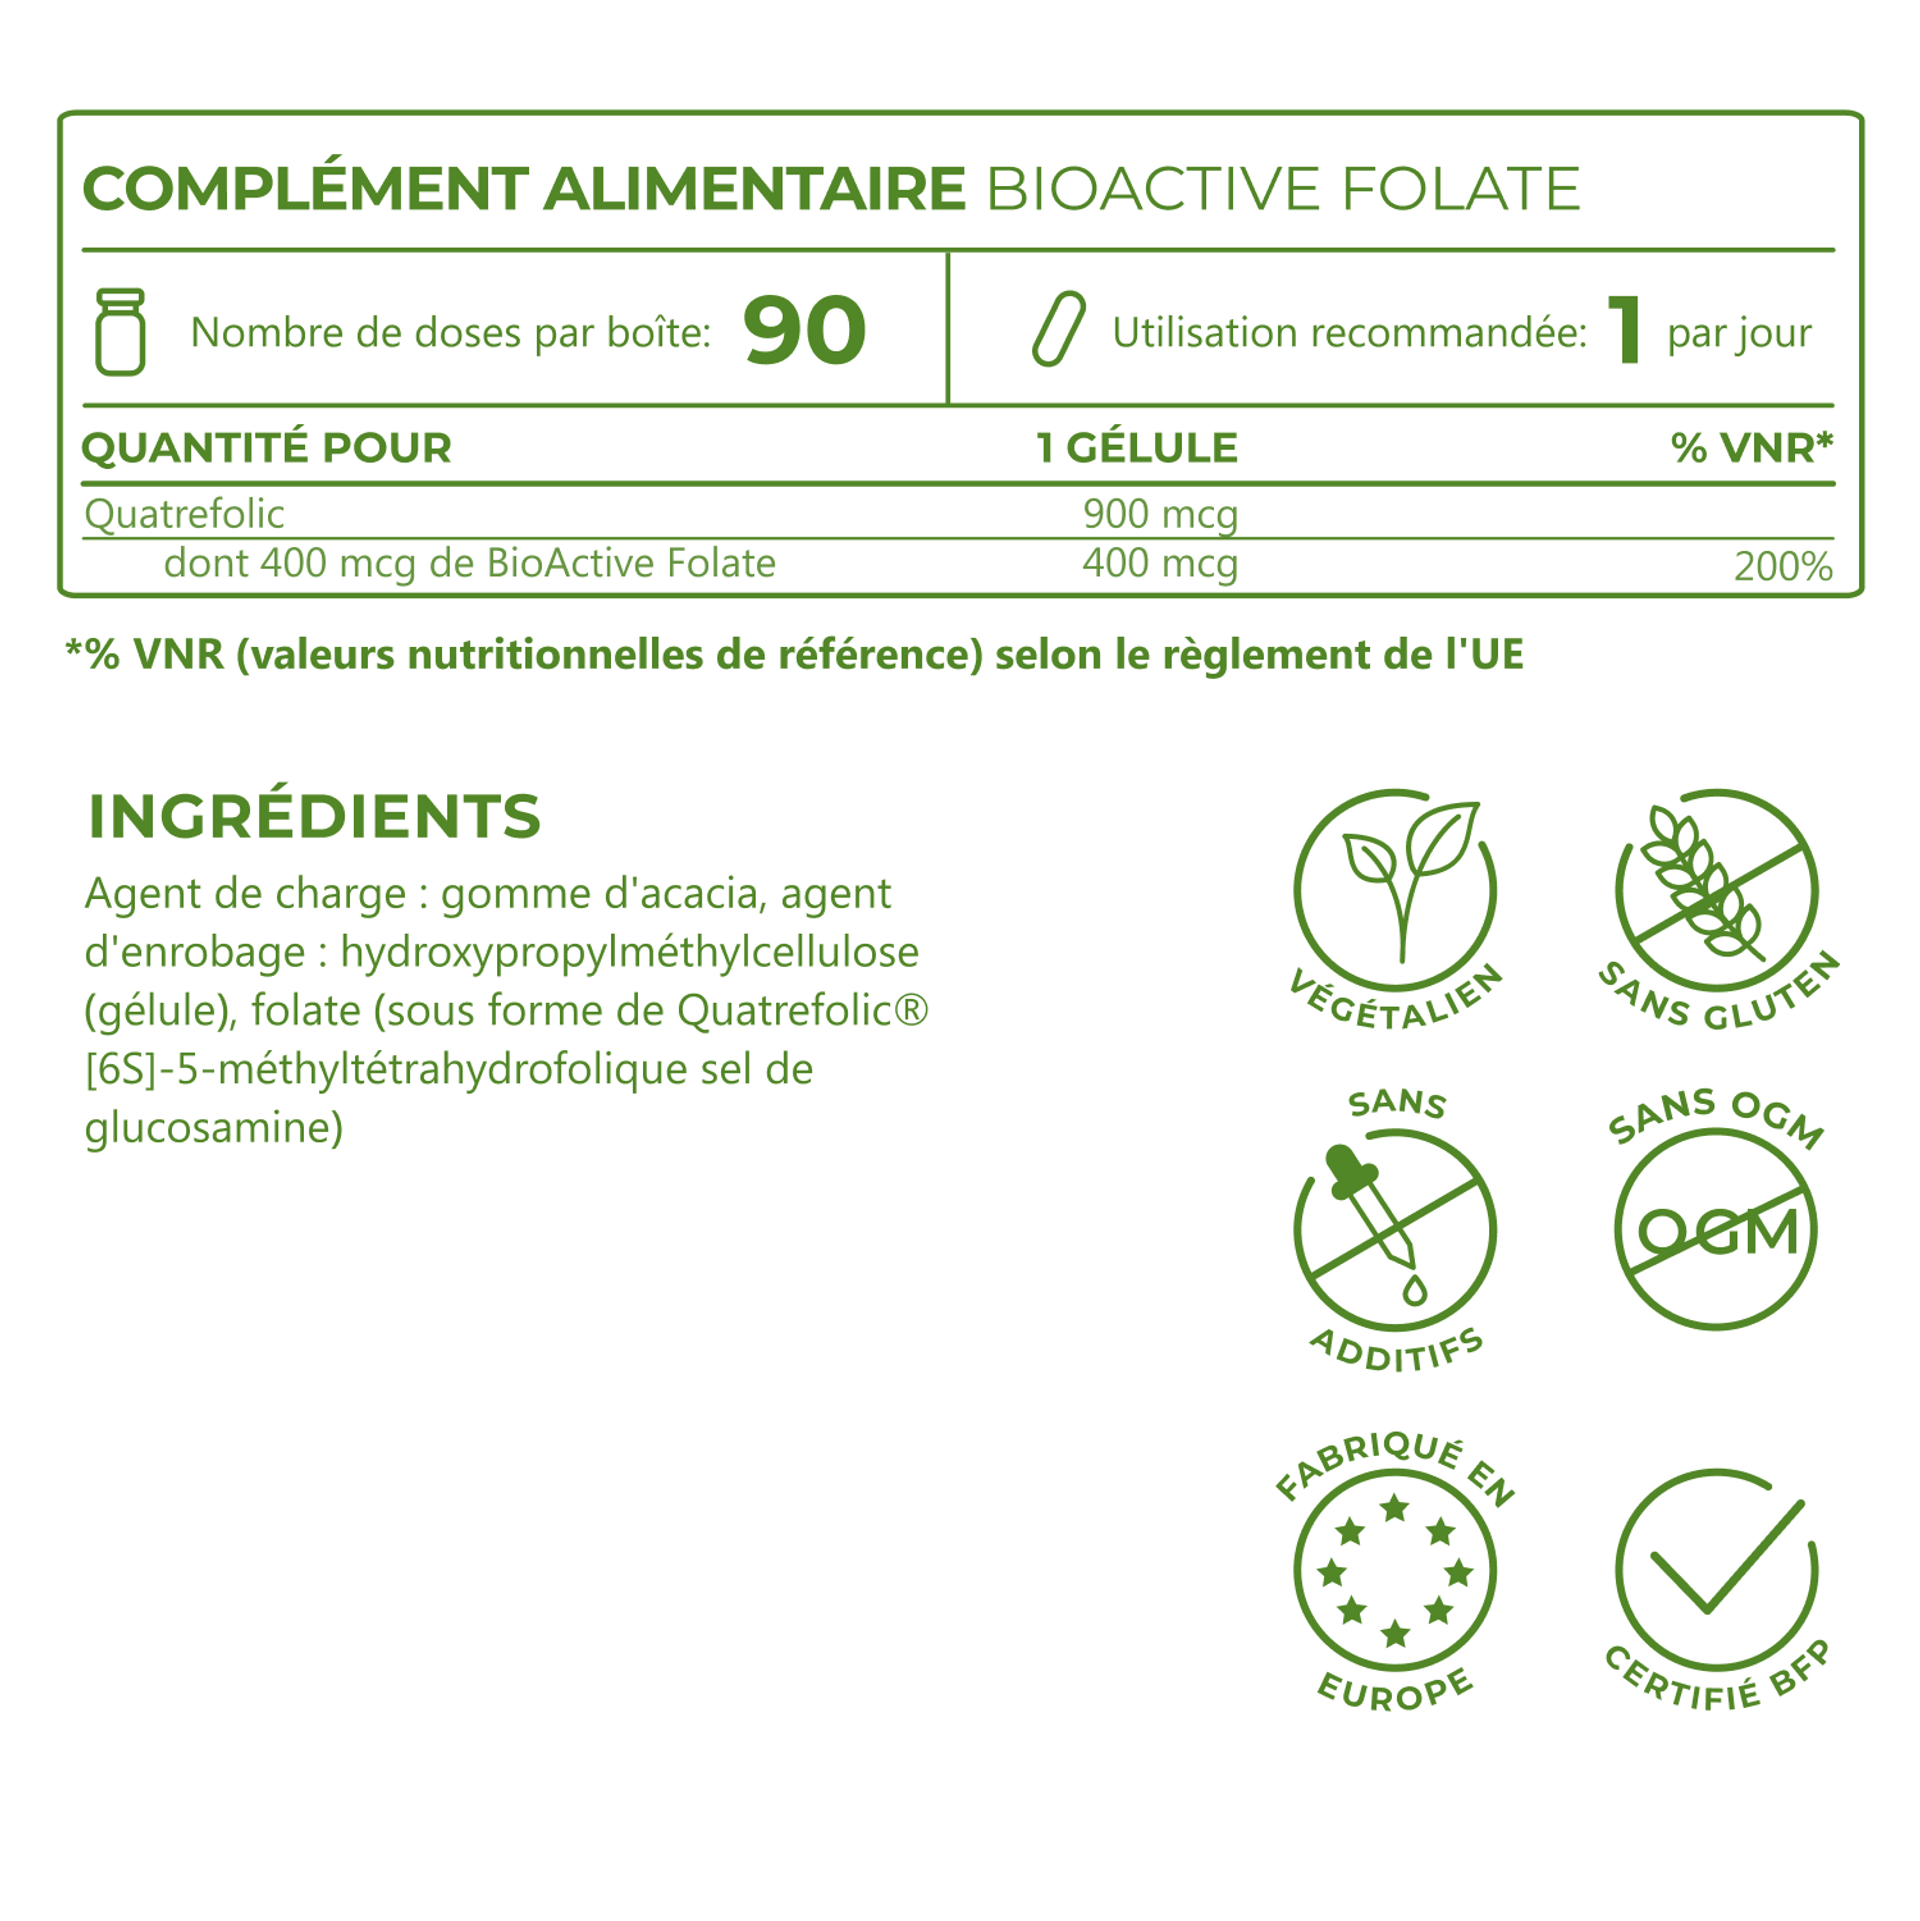 5_FR_Ingredients_Bioactive Folate_6819-13.png